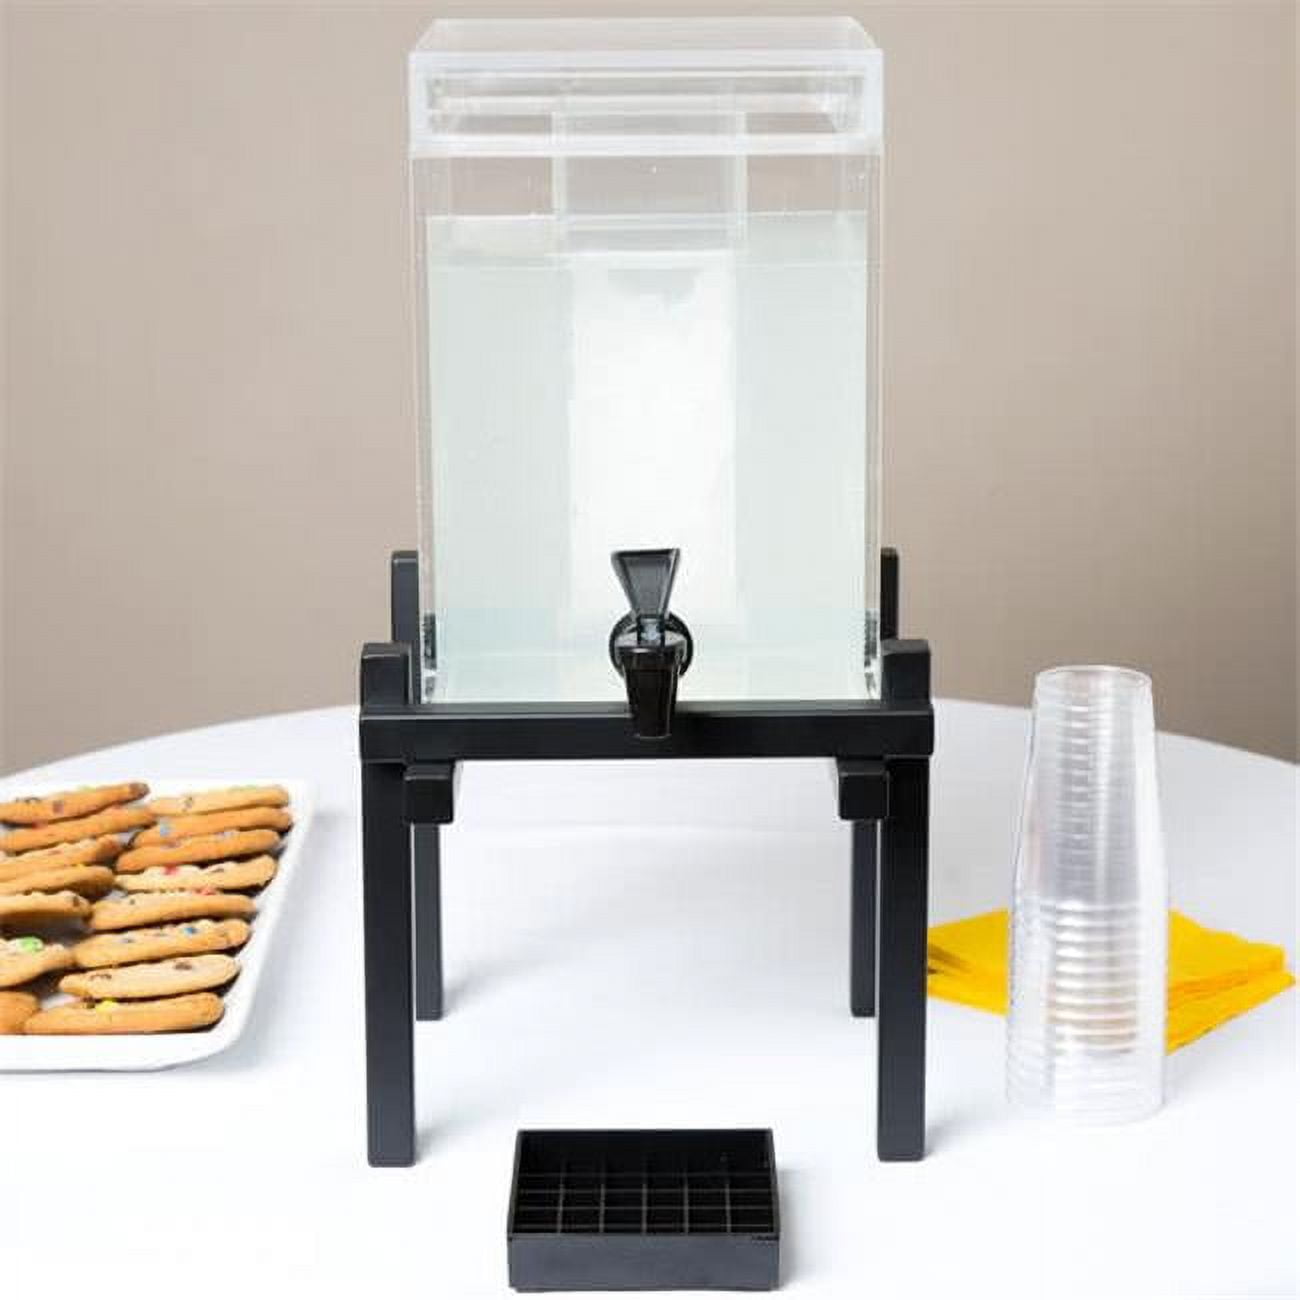 Cal-Mil 1 1/2 gal Acrylic and Black Metal Ice Chamber Beverage